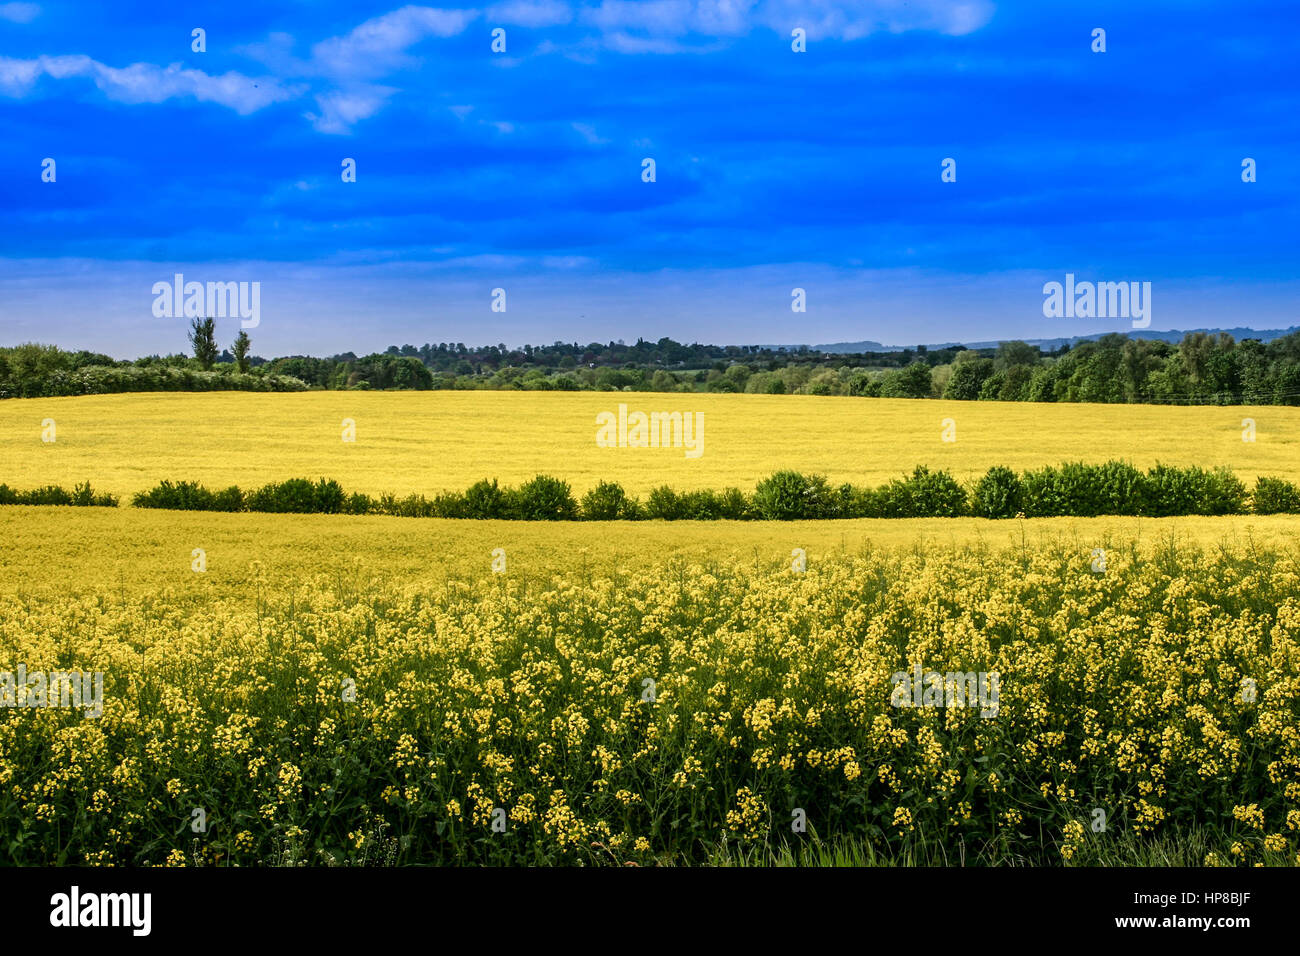 Beautiful English landscape with yellow mustard seed flowers in fields Stock Photo